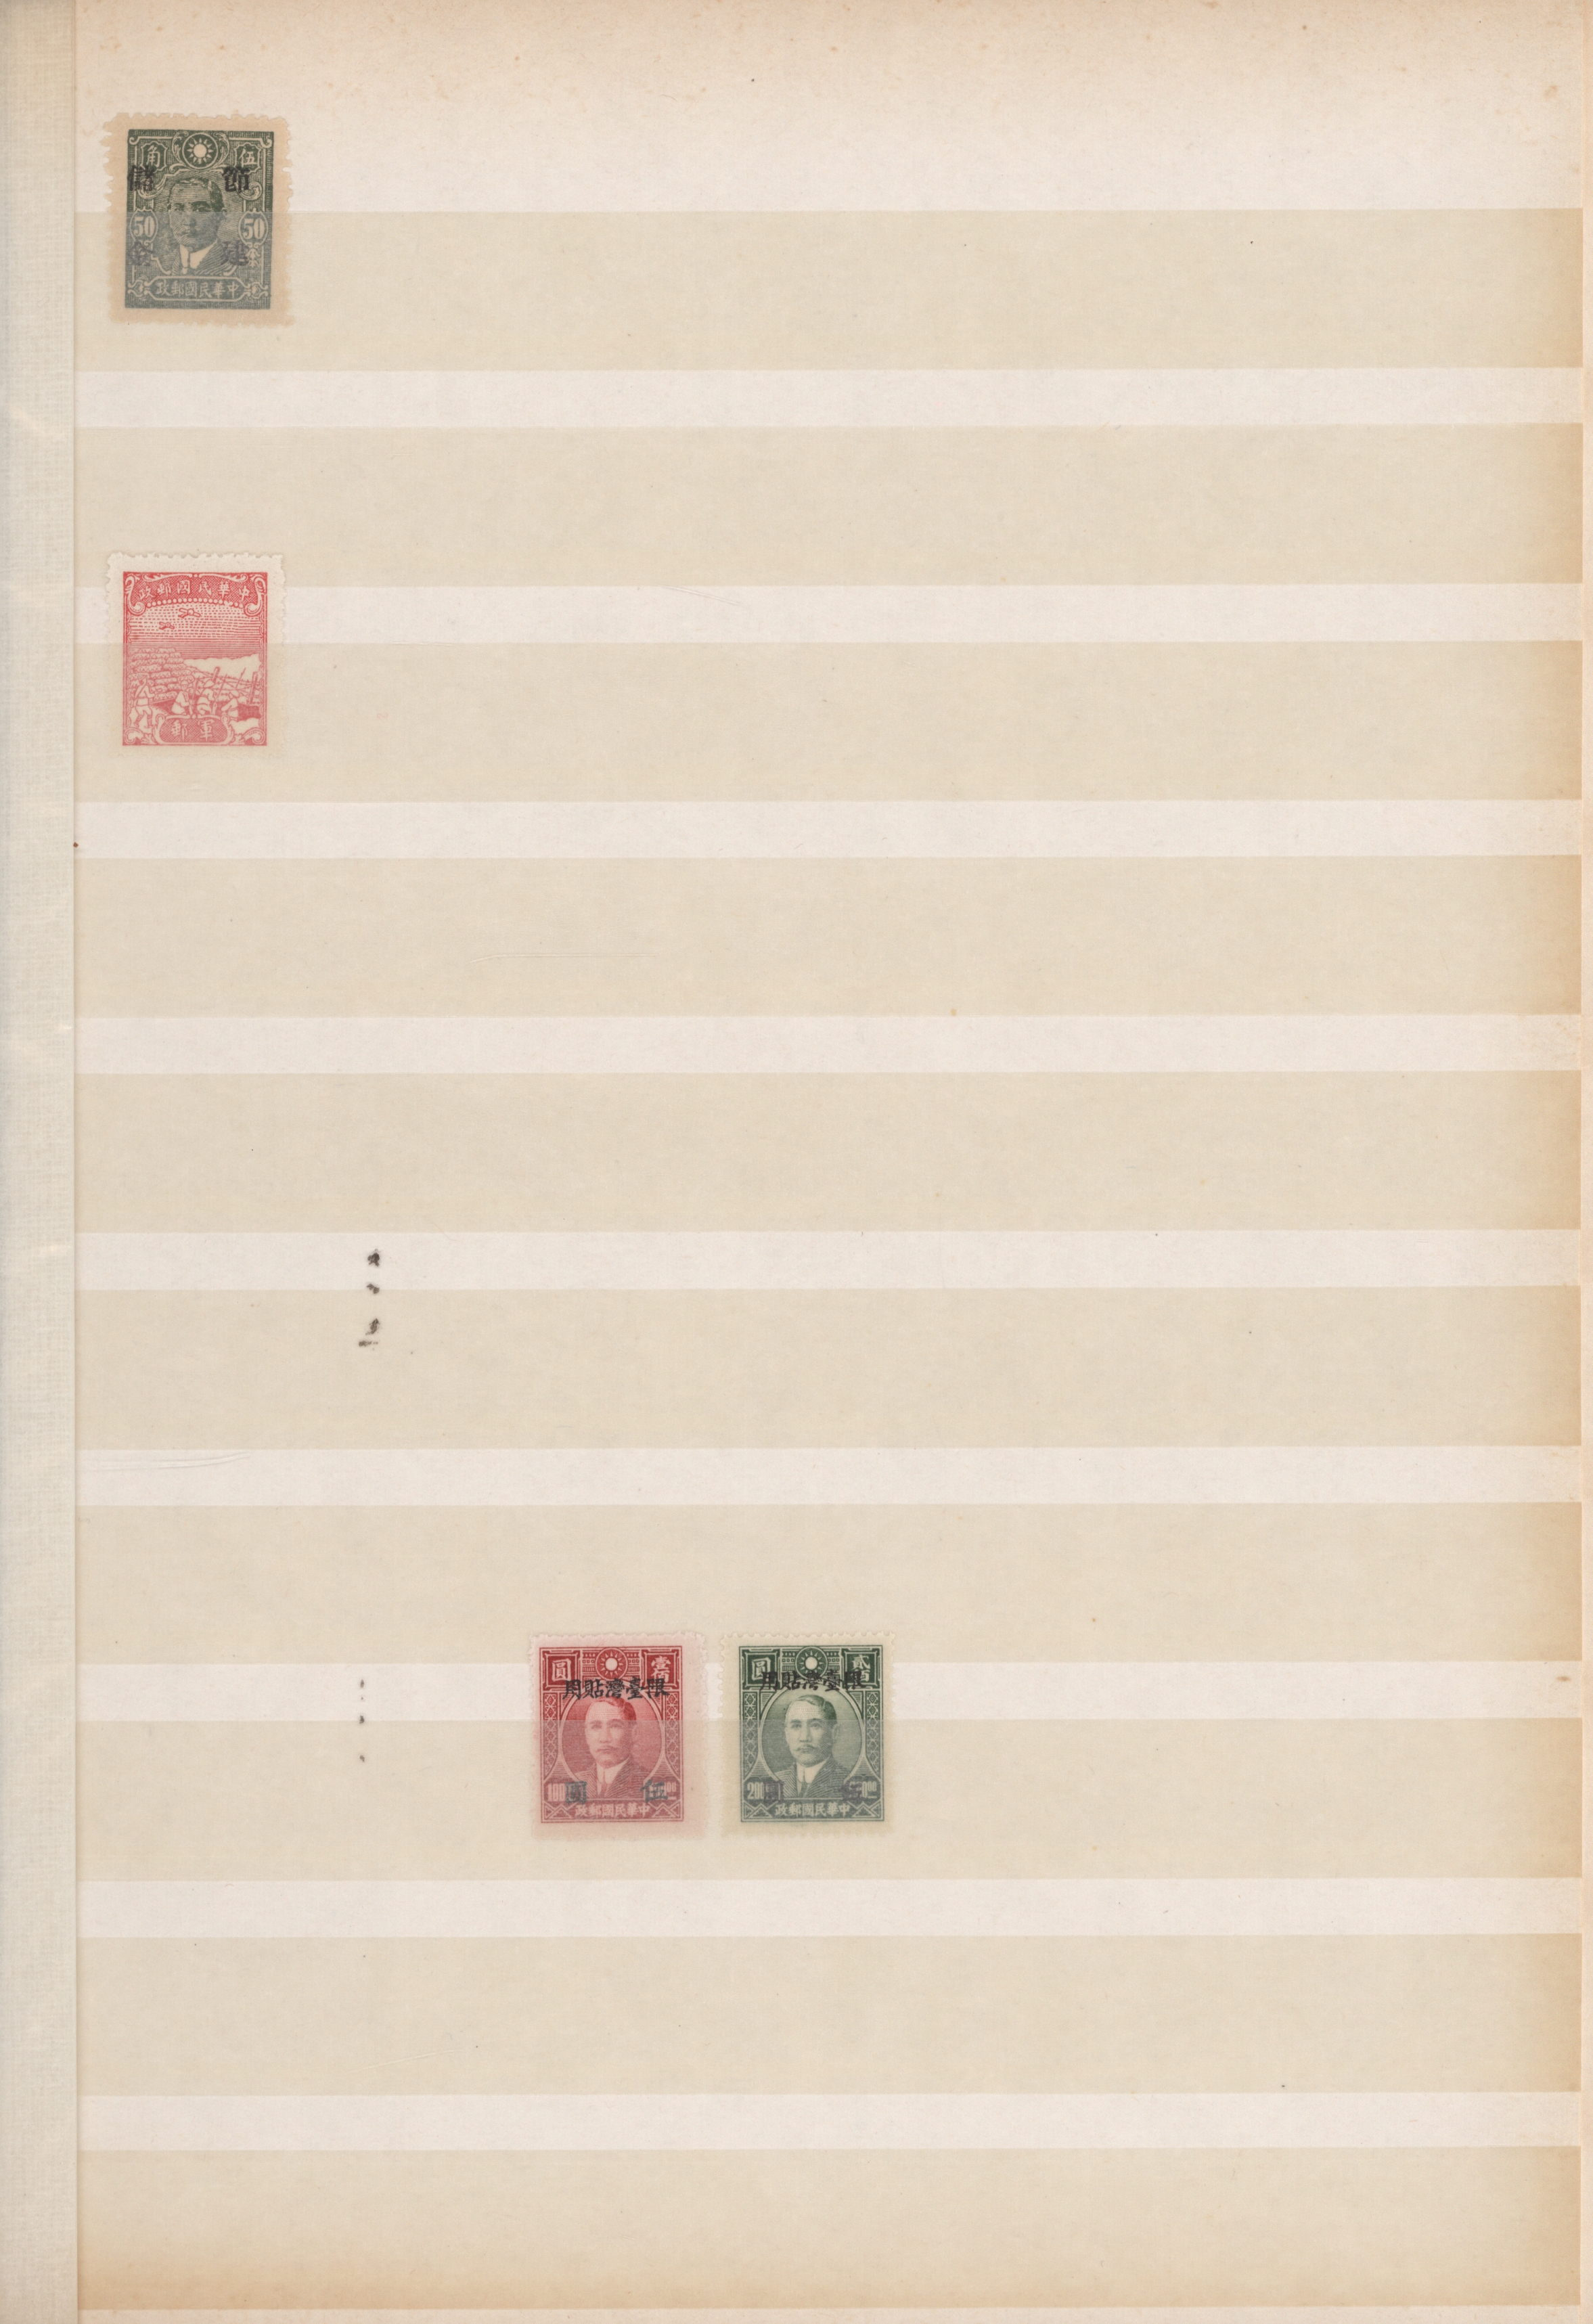 Lot 7179 - China  -  Auktionshaus Christoph Gärtner GmbH & Co. KG 54th AUCTION - Day 4